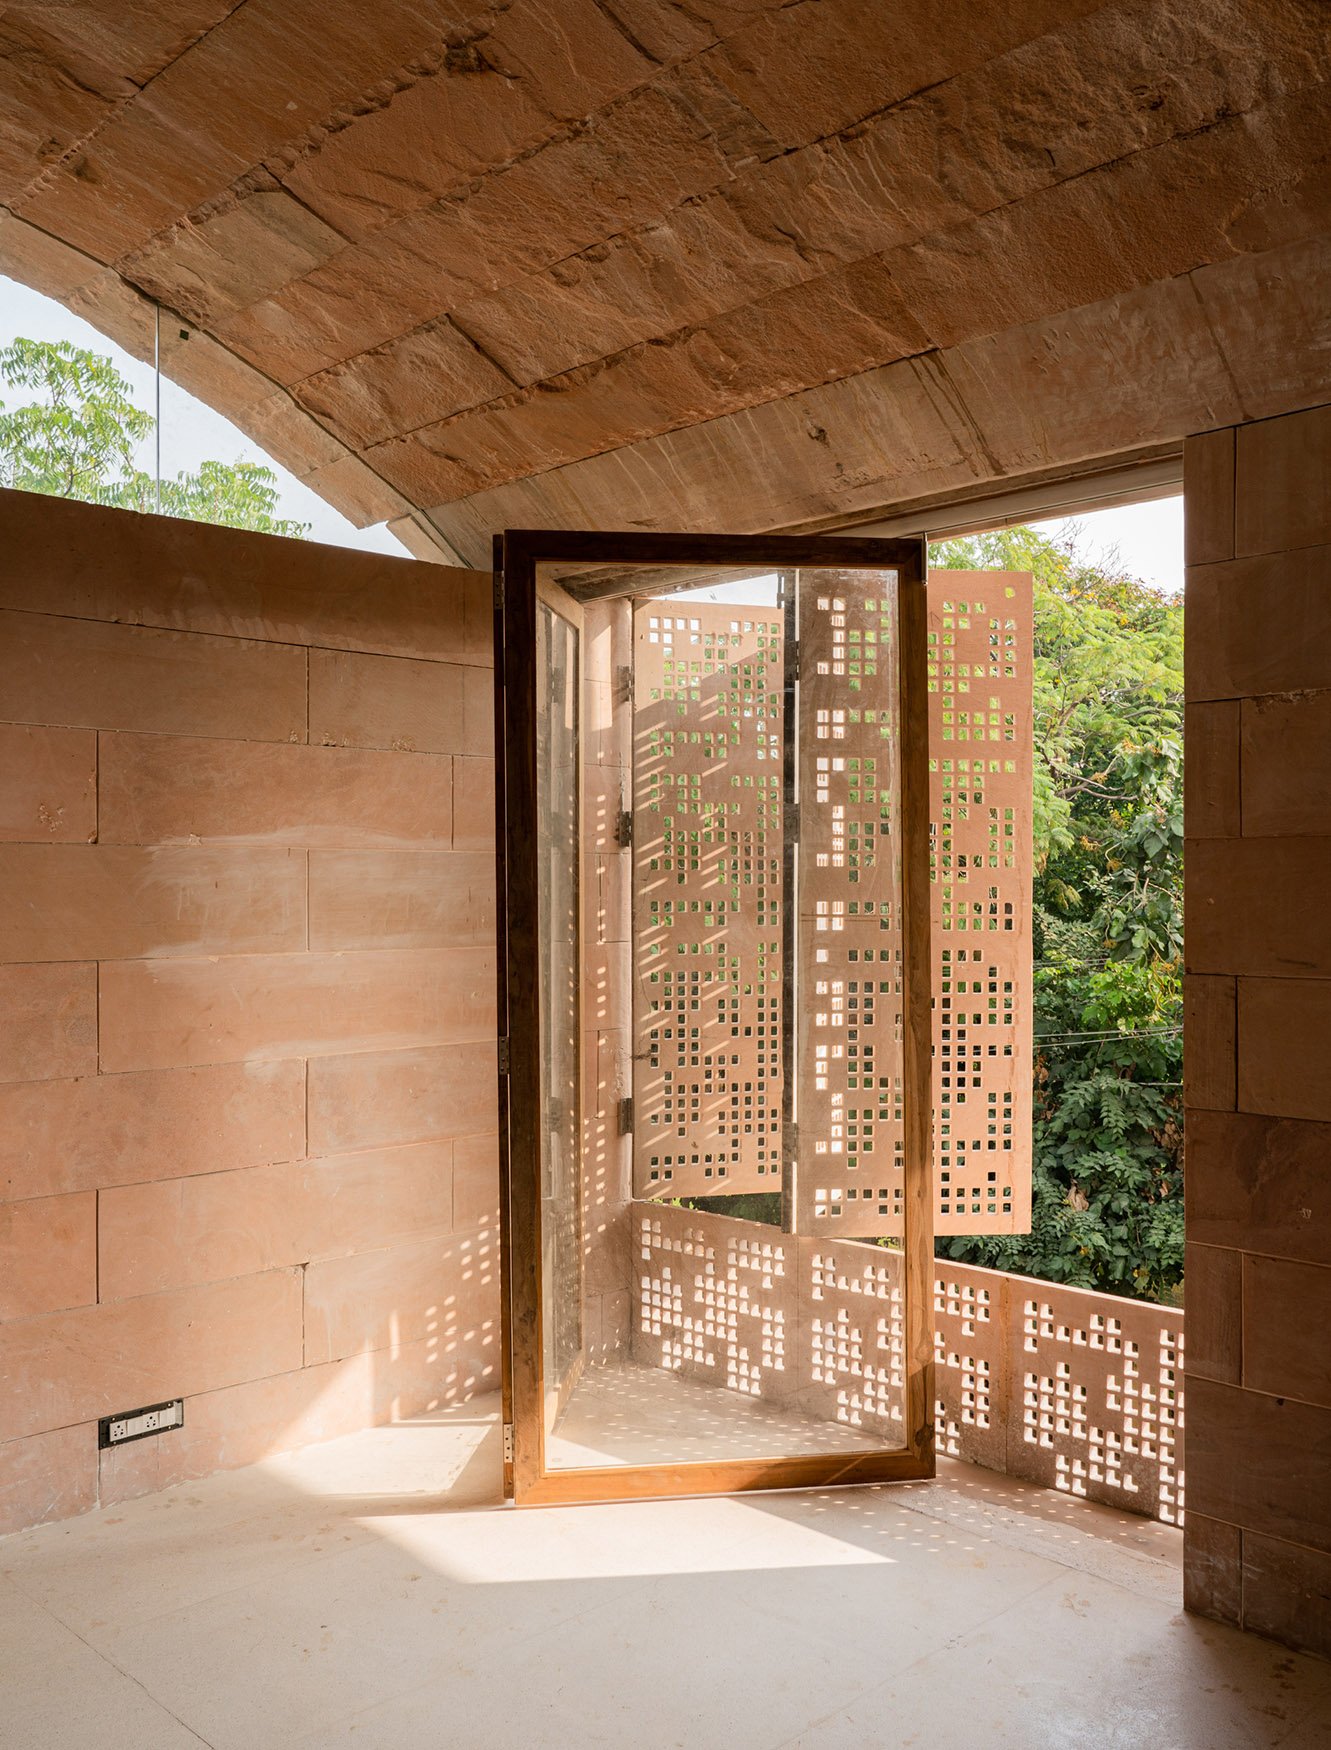 The light into the living and sleeping spaces is controlled through the operation of hand-crafted stone screens ( Jaalis). The naturally textured weight of the compression vaults amplifies the ethereal lig | Fabien Charuau